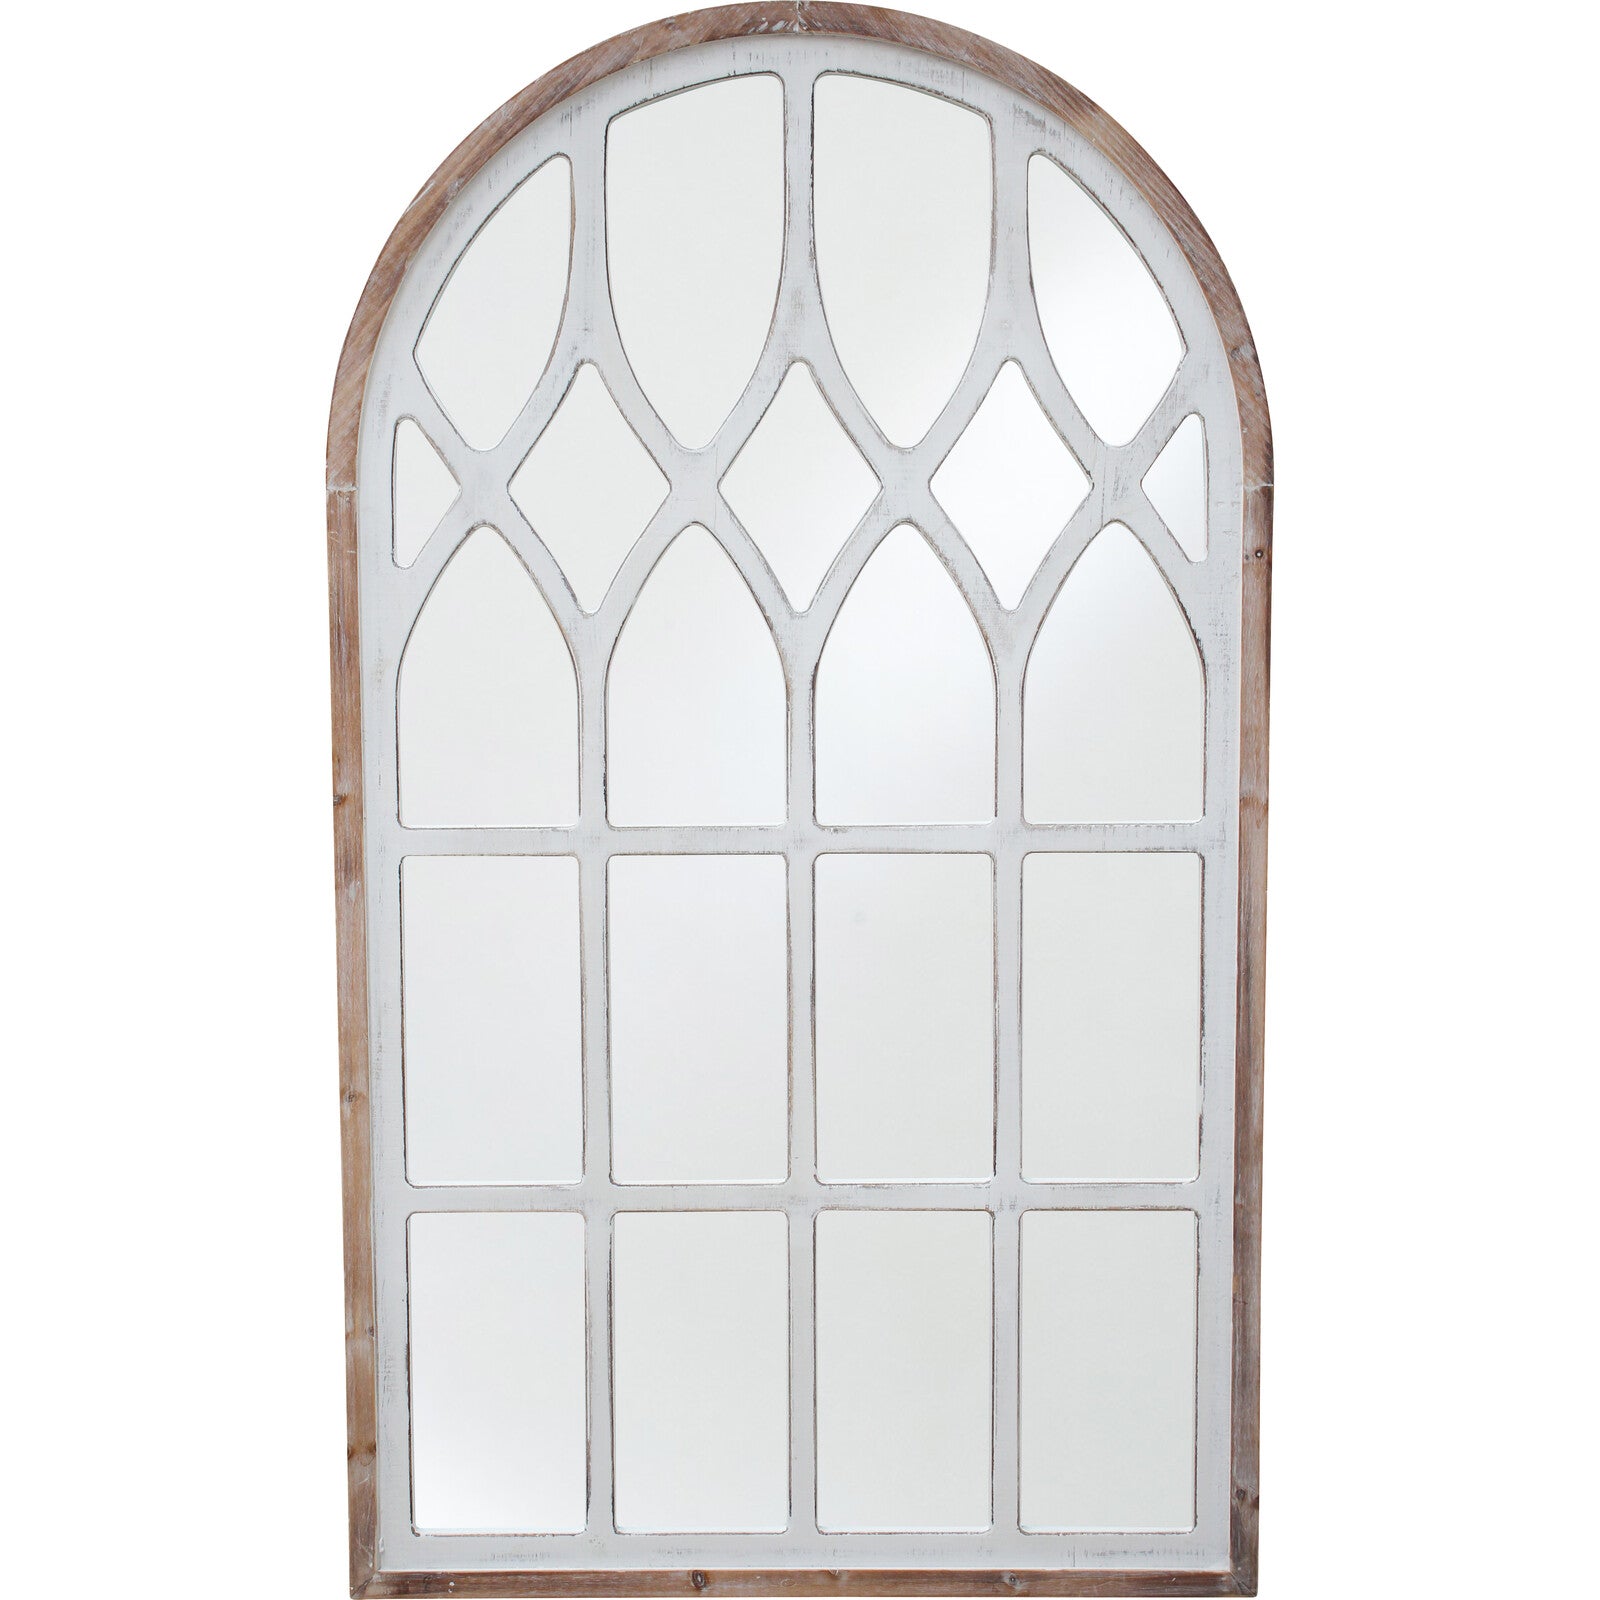 Rustic Arched Mirror